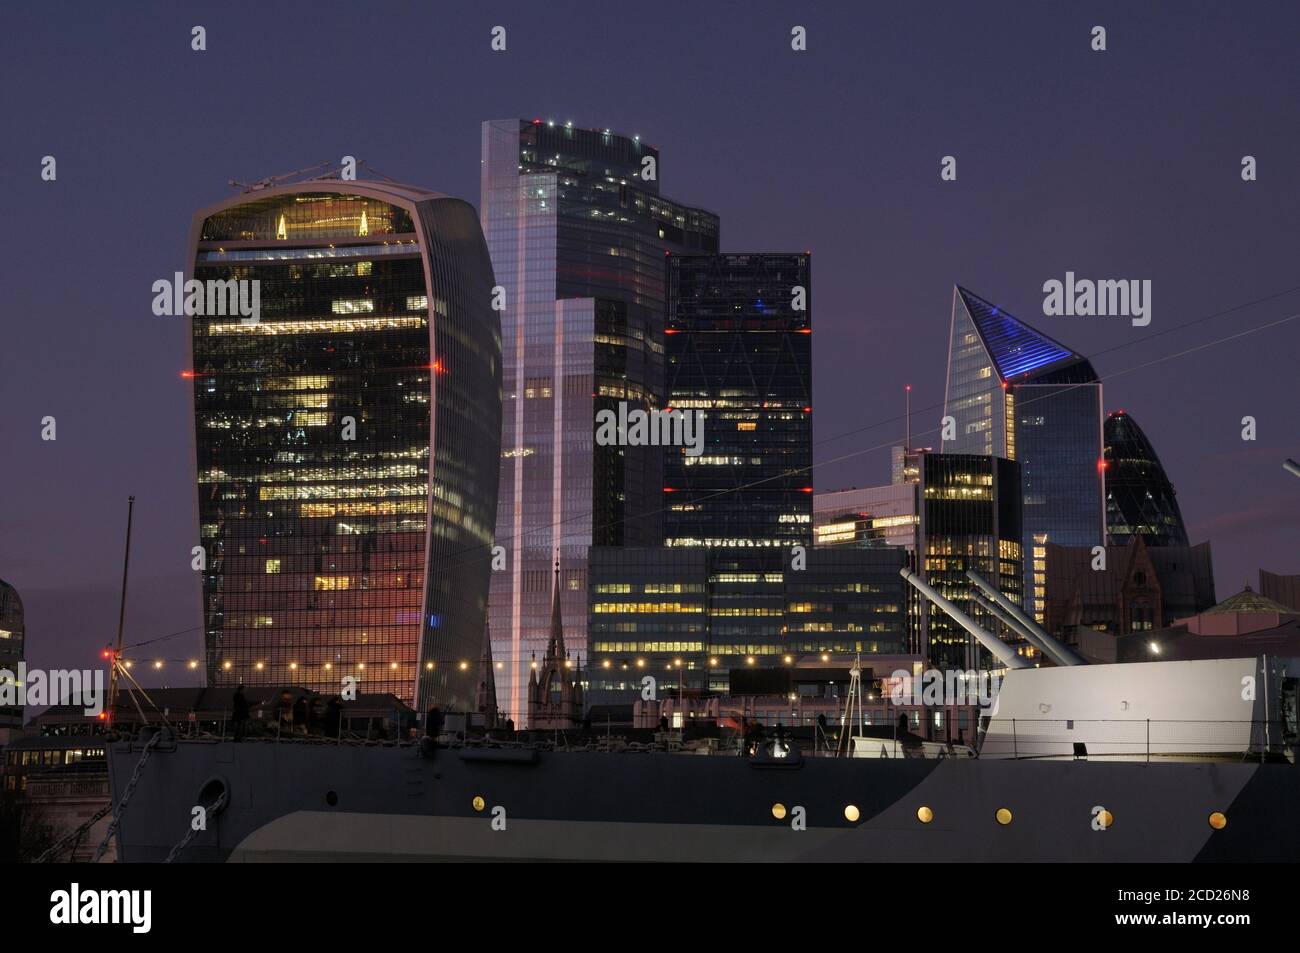 City of London skyline at dusk with HMS Belfast in the foreground, London, England, UK Stock Photo